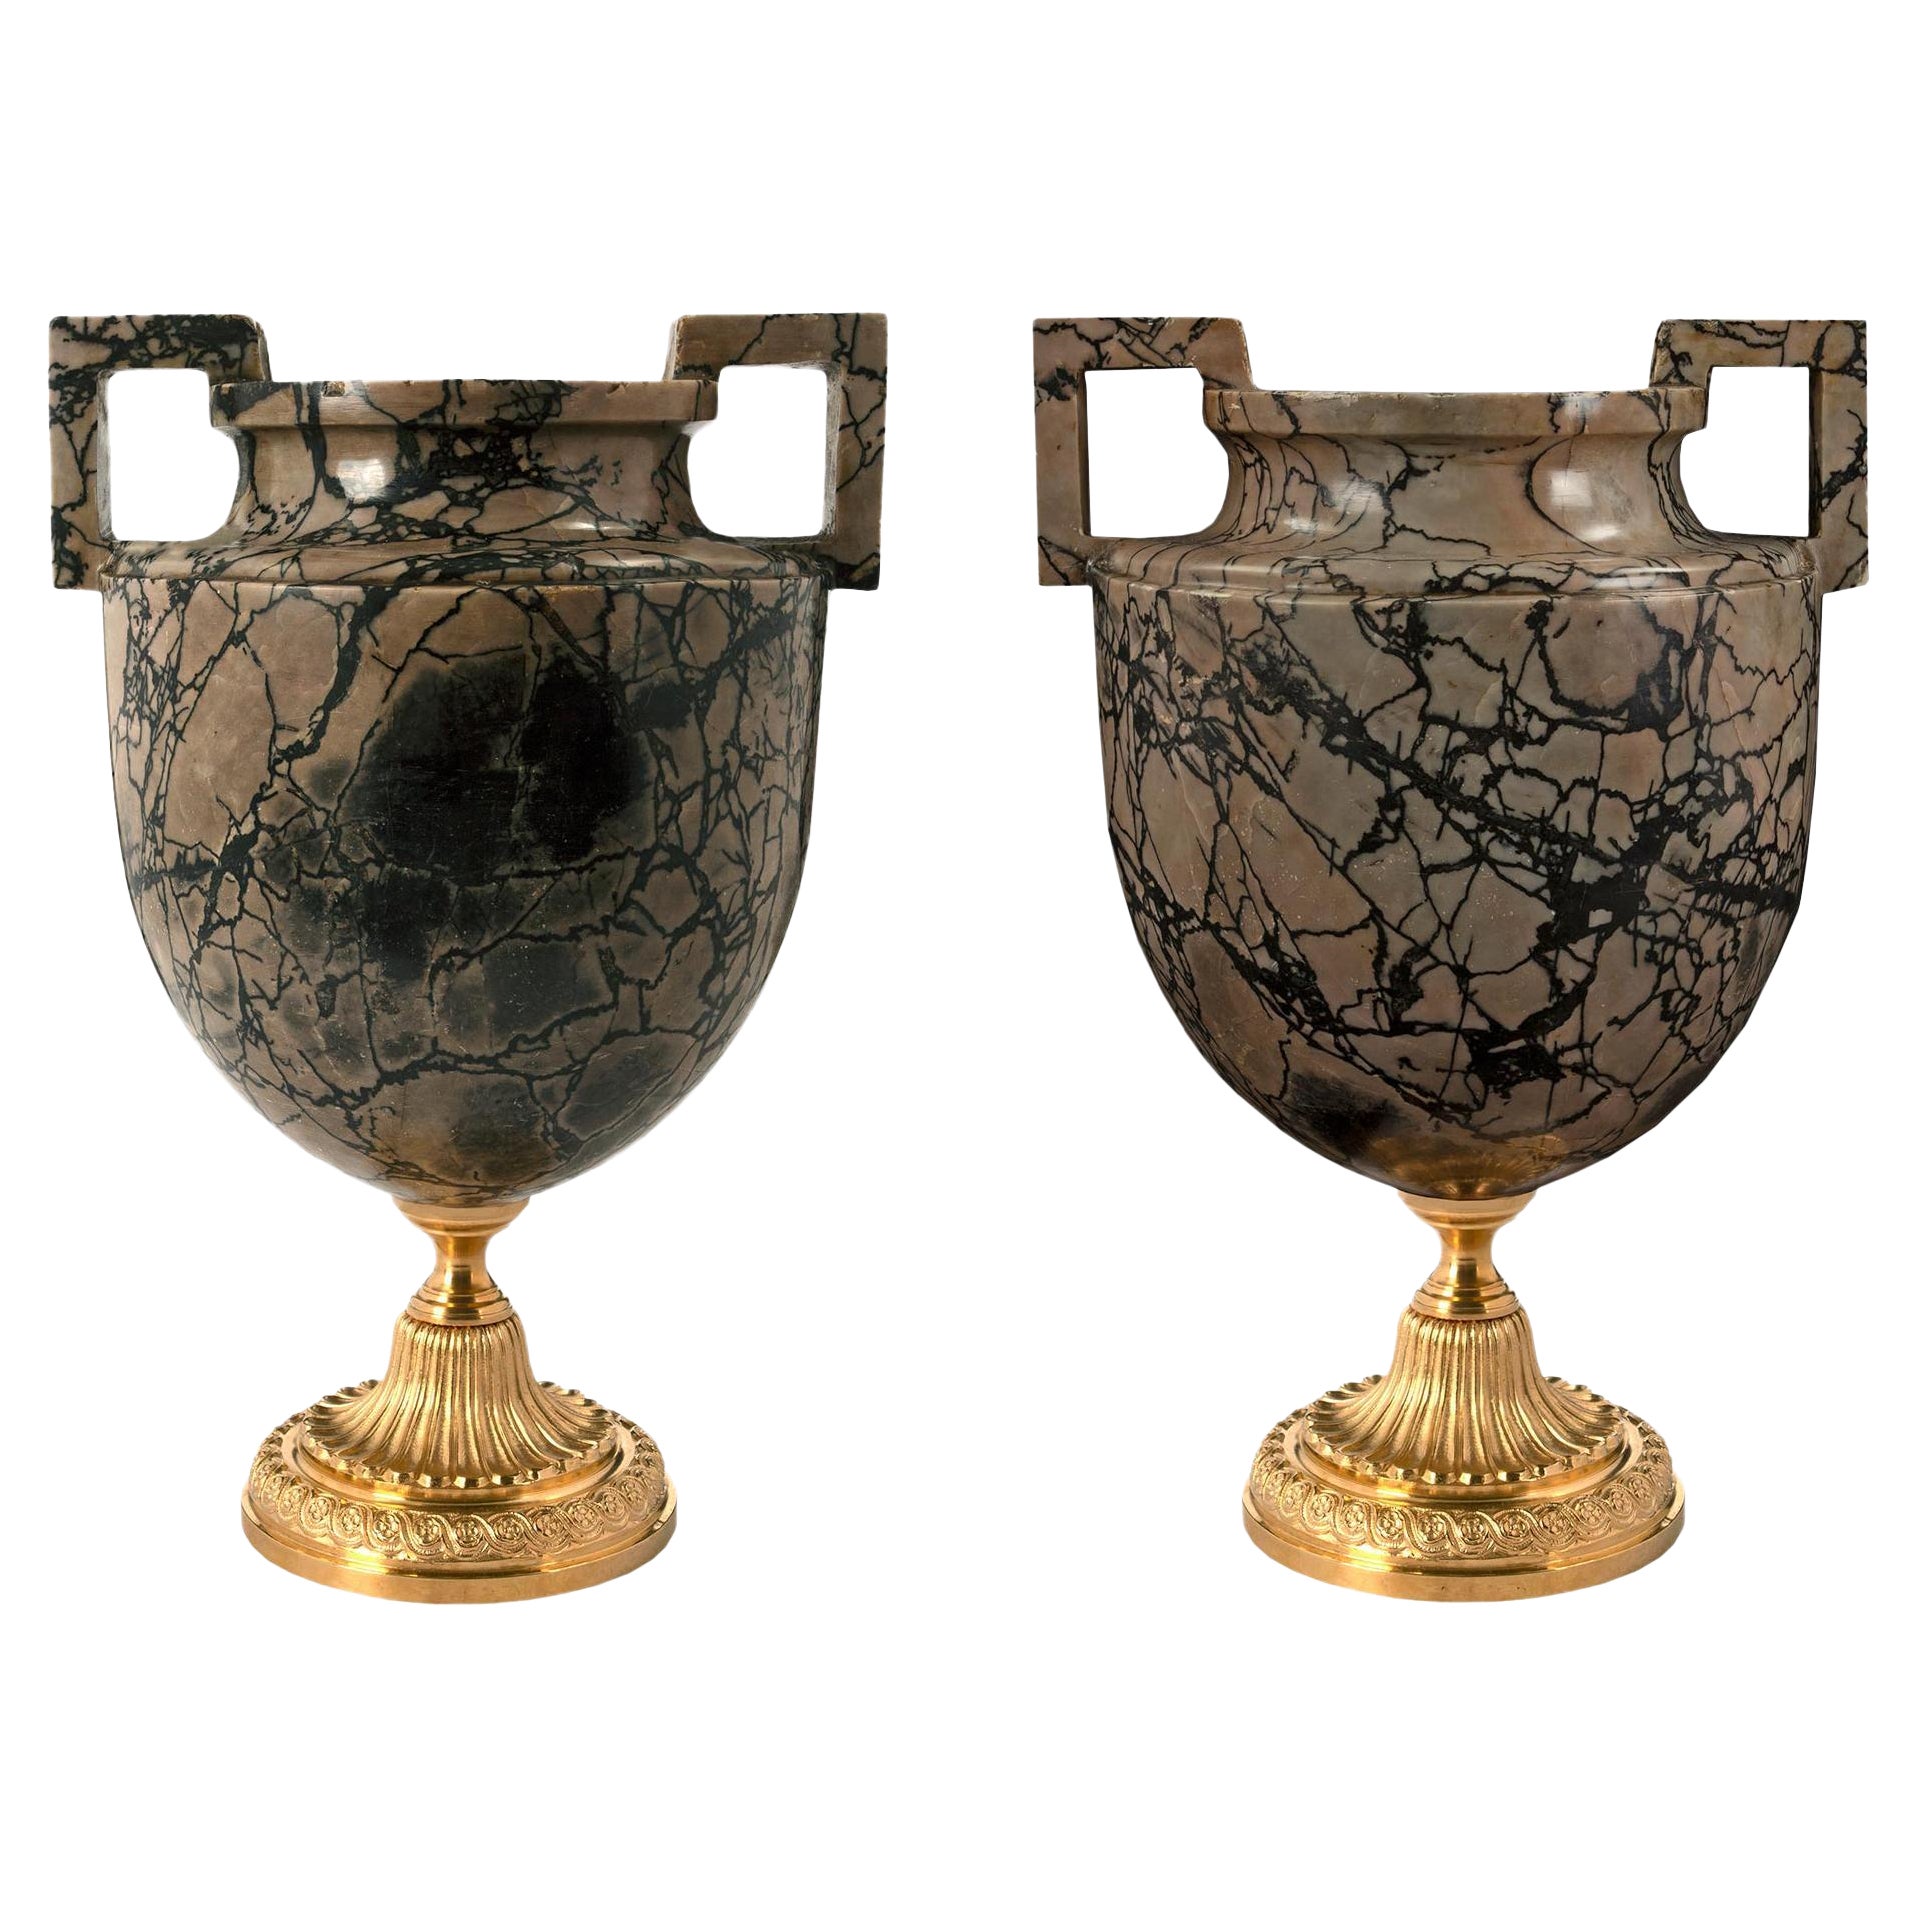 Pair of Italian Mid-19th Century Neoclassical Style Marble and Ormolu Urns